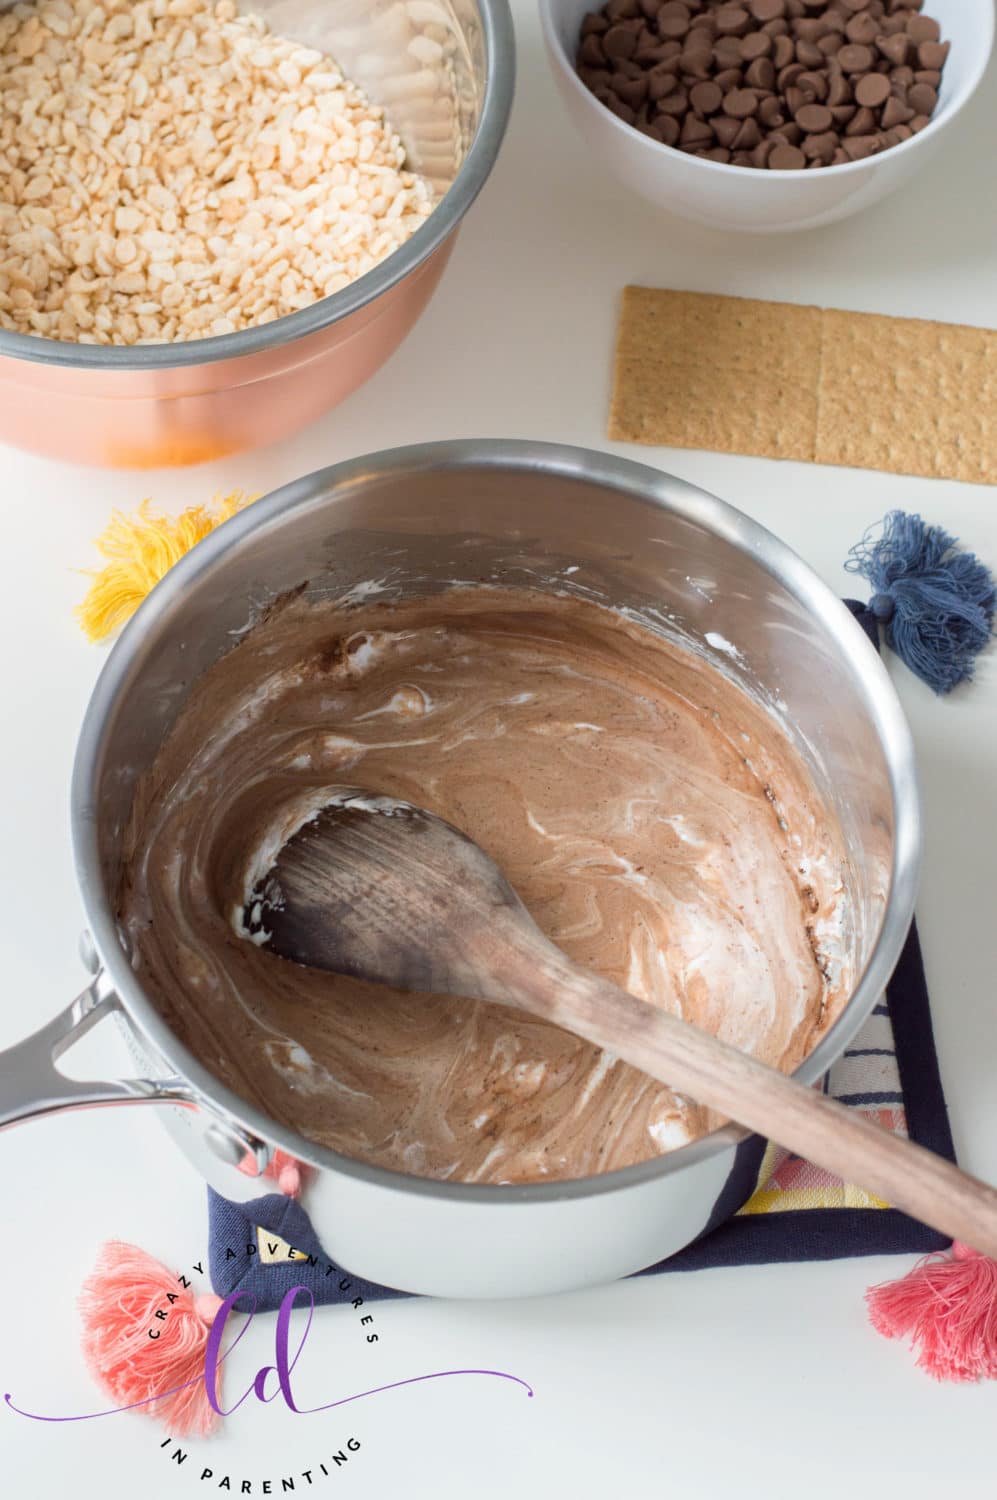 Add Cocoa to Melted Marshmallows for S'mores Rice Krispies Treats